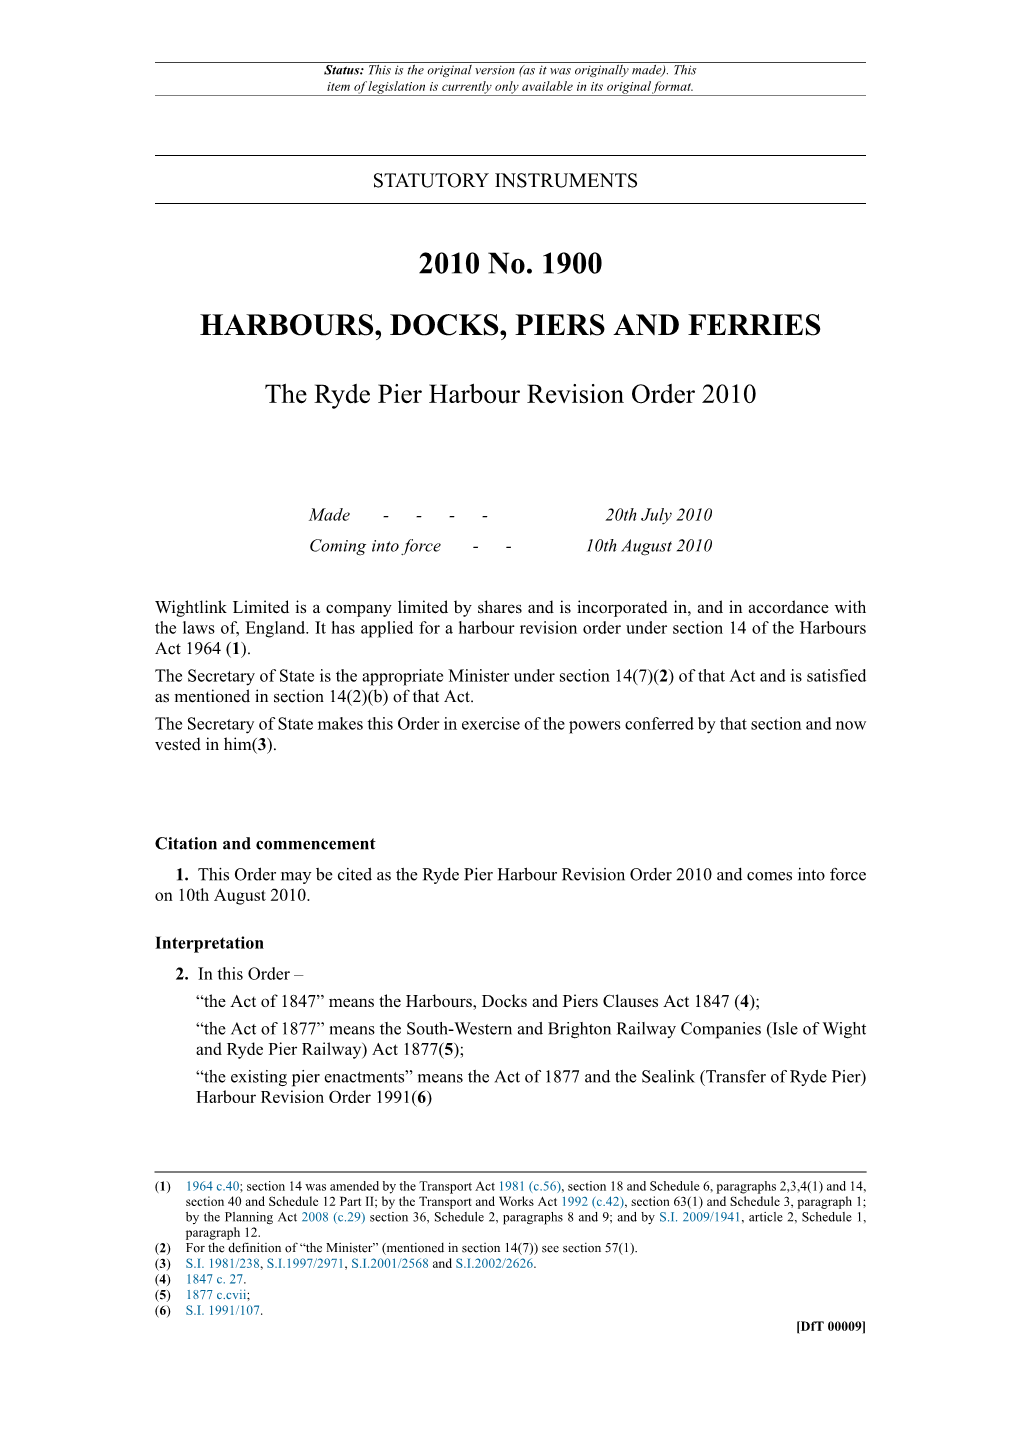 The Ryde Pier Harbour Revision Order 2010